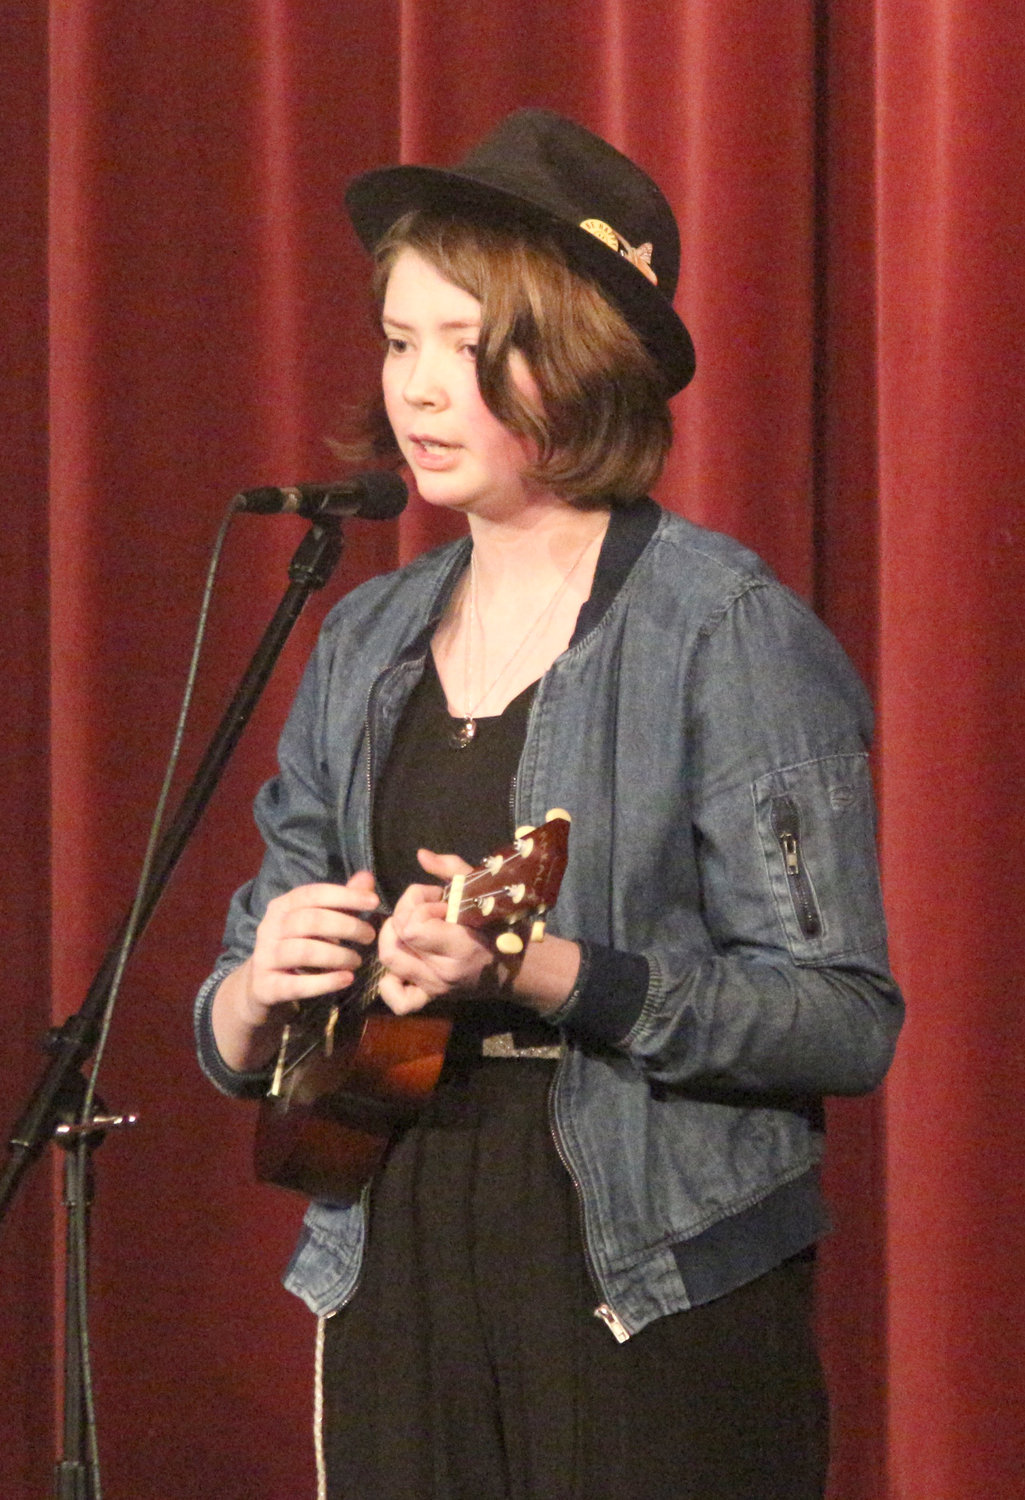 Maddie O’Donnell plays her ukulele while singing “July” at the Mid-Prairie Middle School choral concert on Tuesday, Feb. 25.